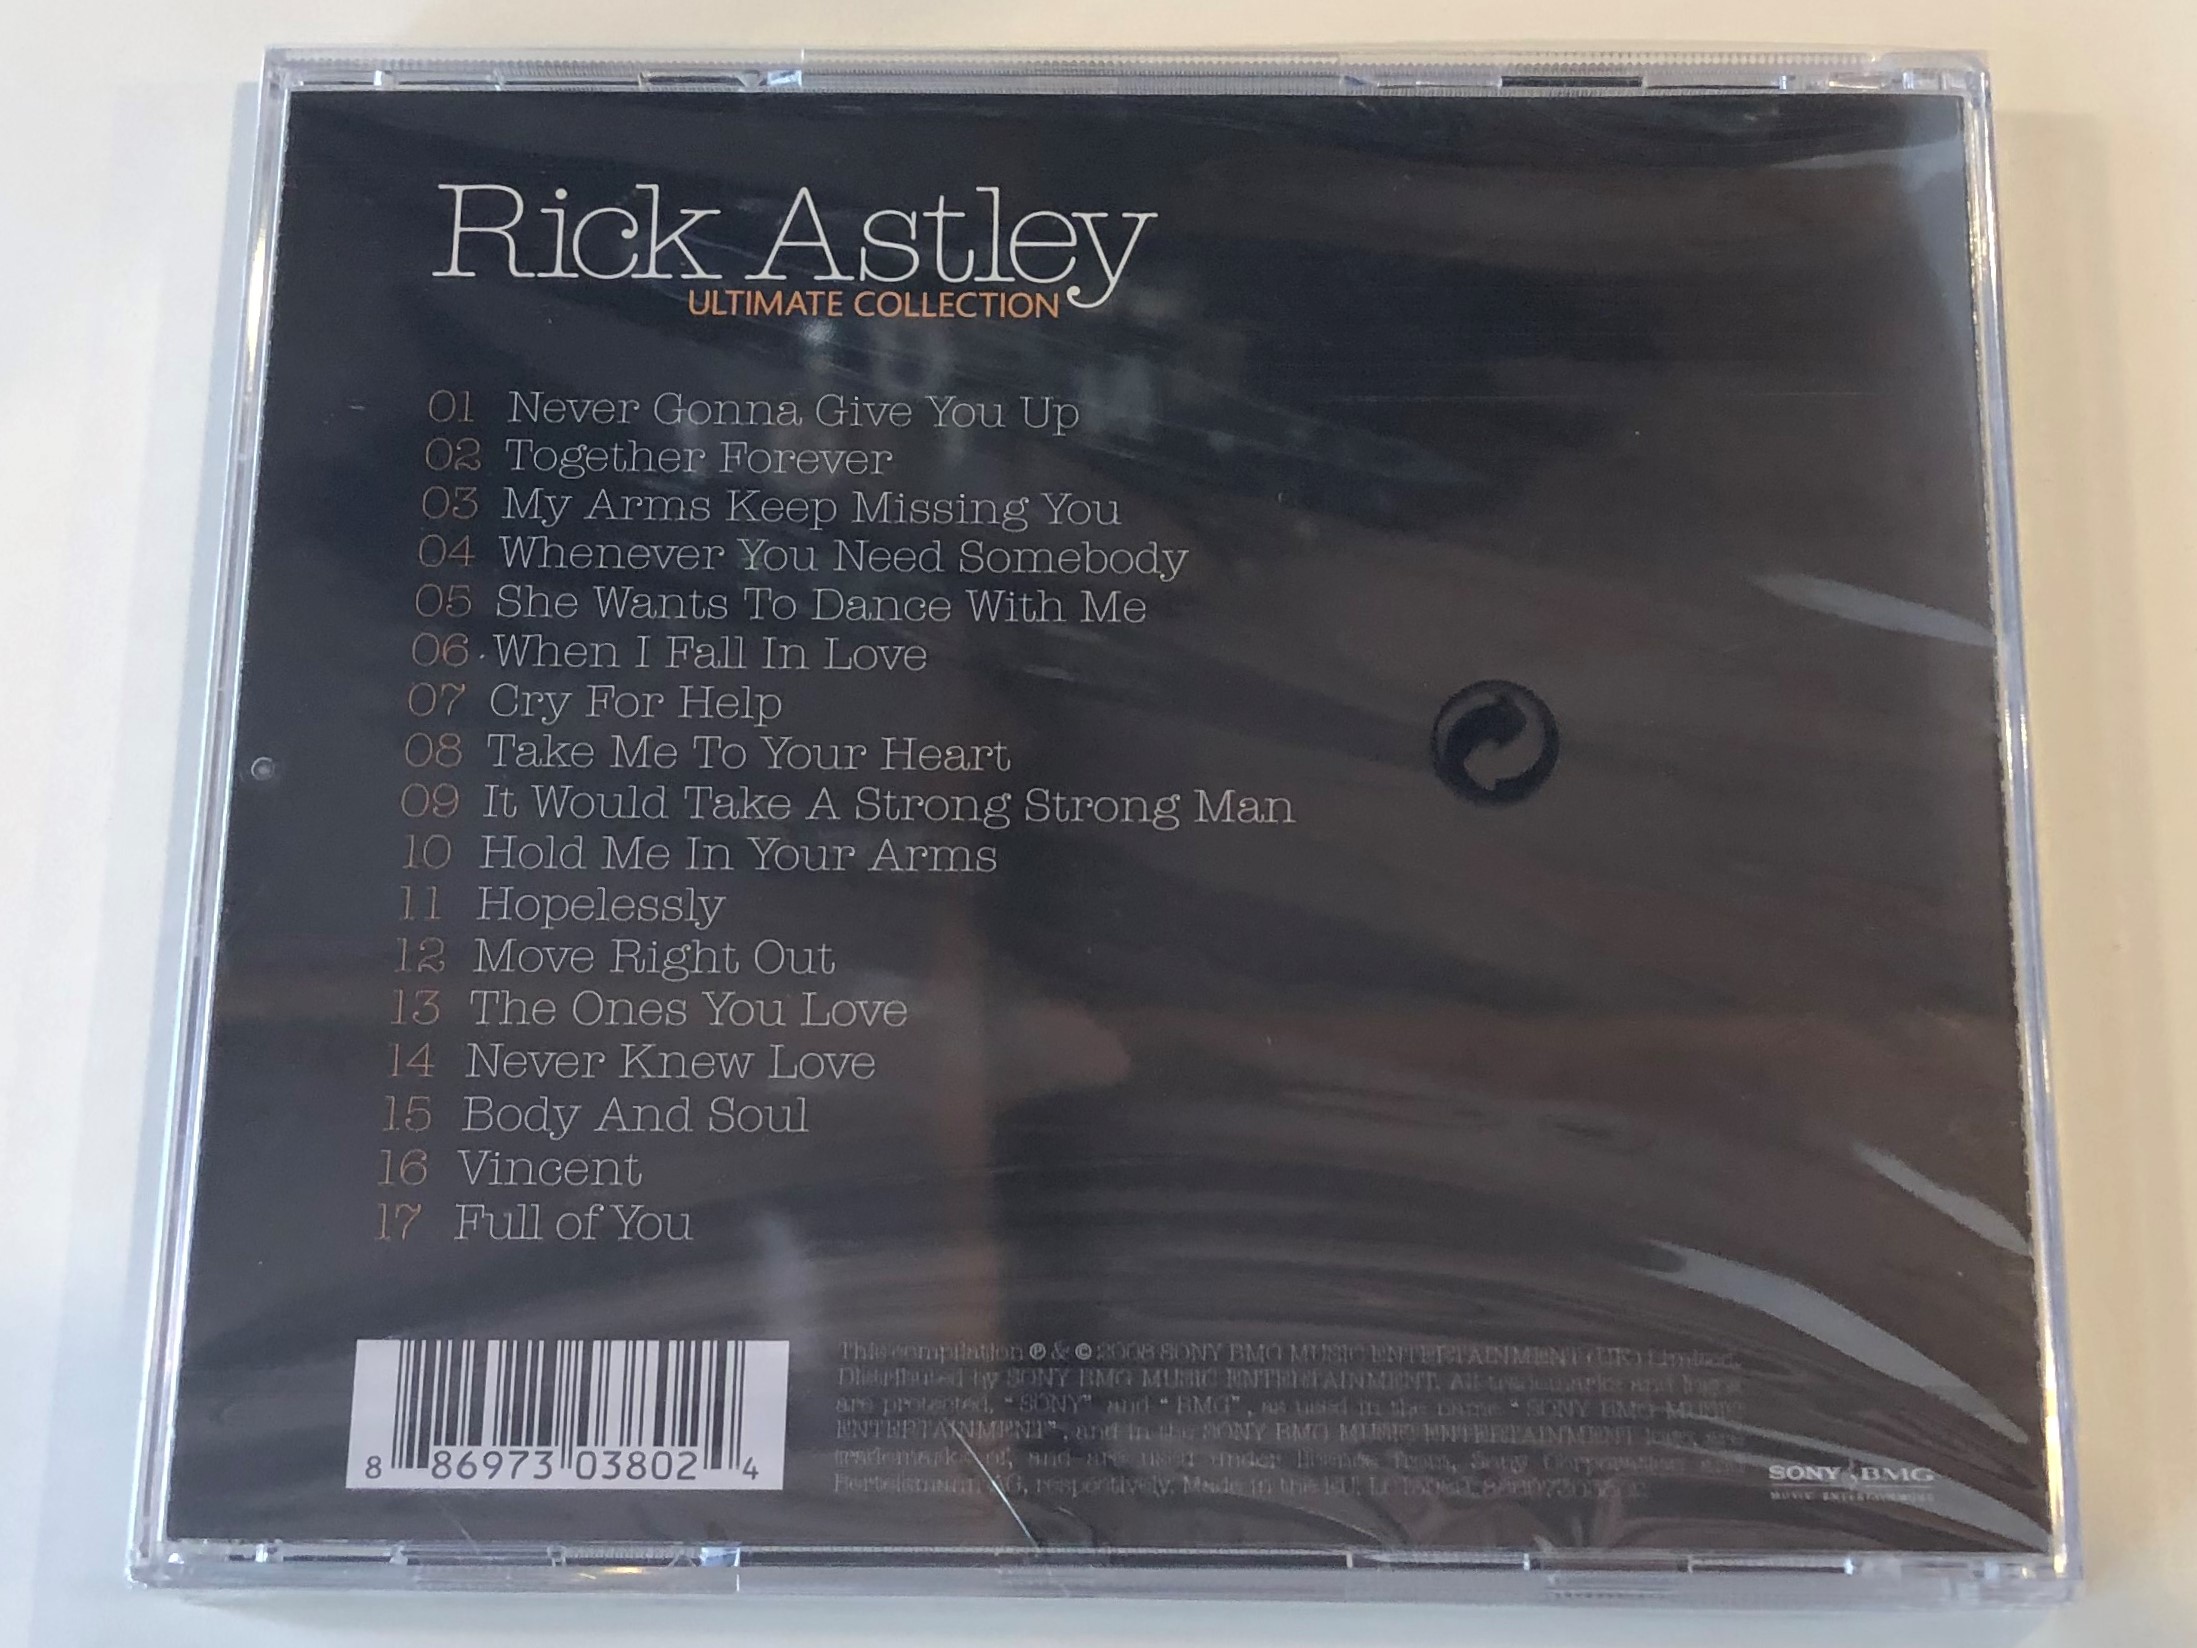 rick-astley-ultimate-collection-sony-bmg-music-entertainment-audio-cd-2008-886973038024-2-.jpg